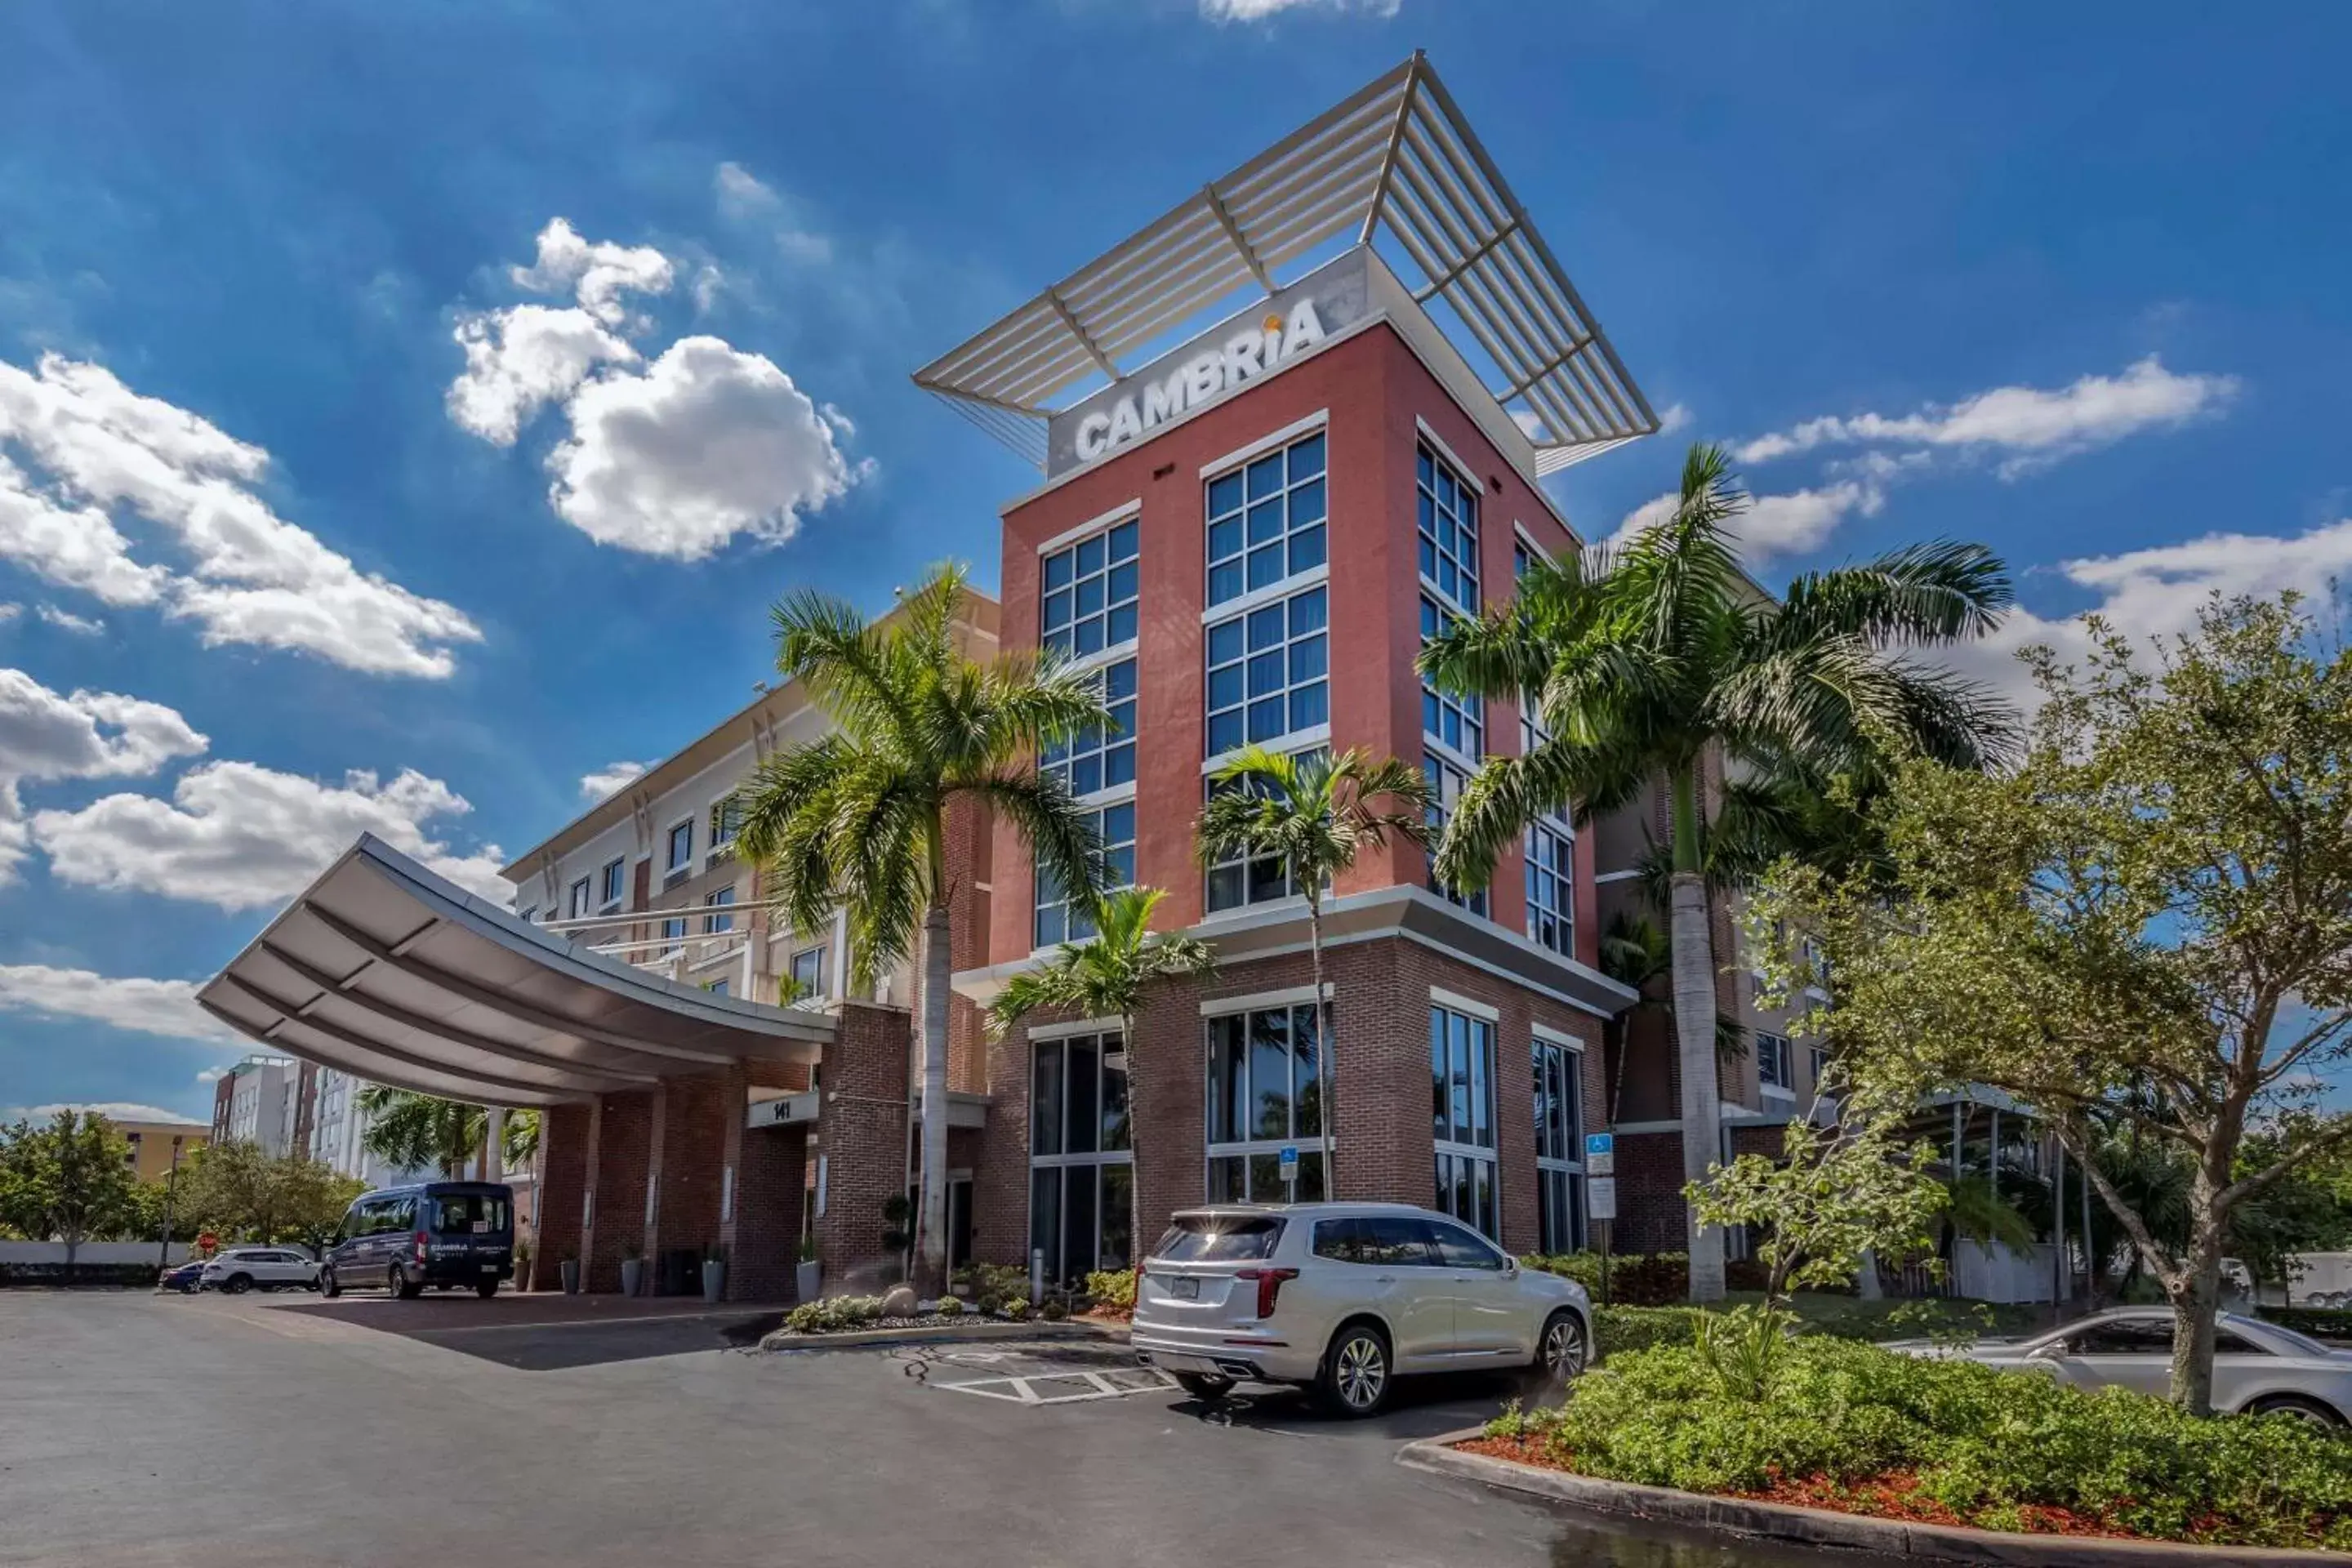 Property Building in Cambria Hotel Ft Lauderdale, Airport South & Cruise Port